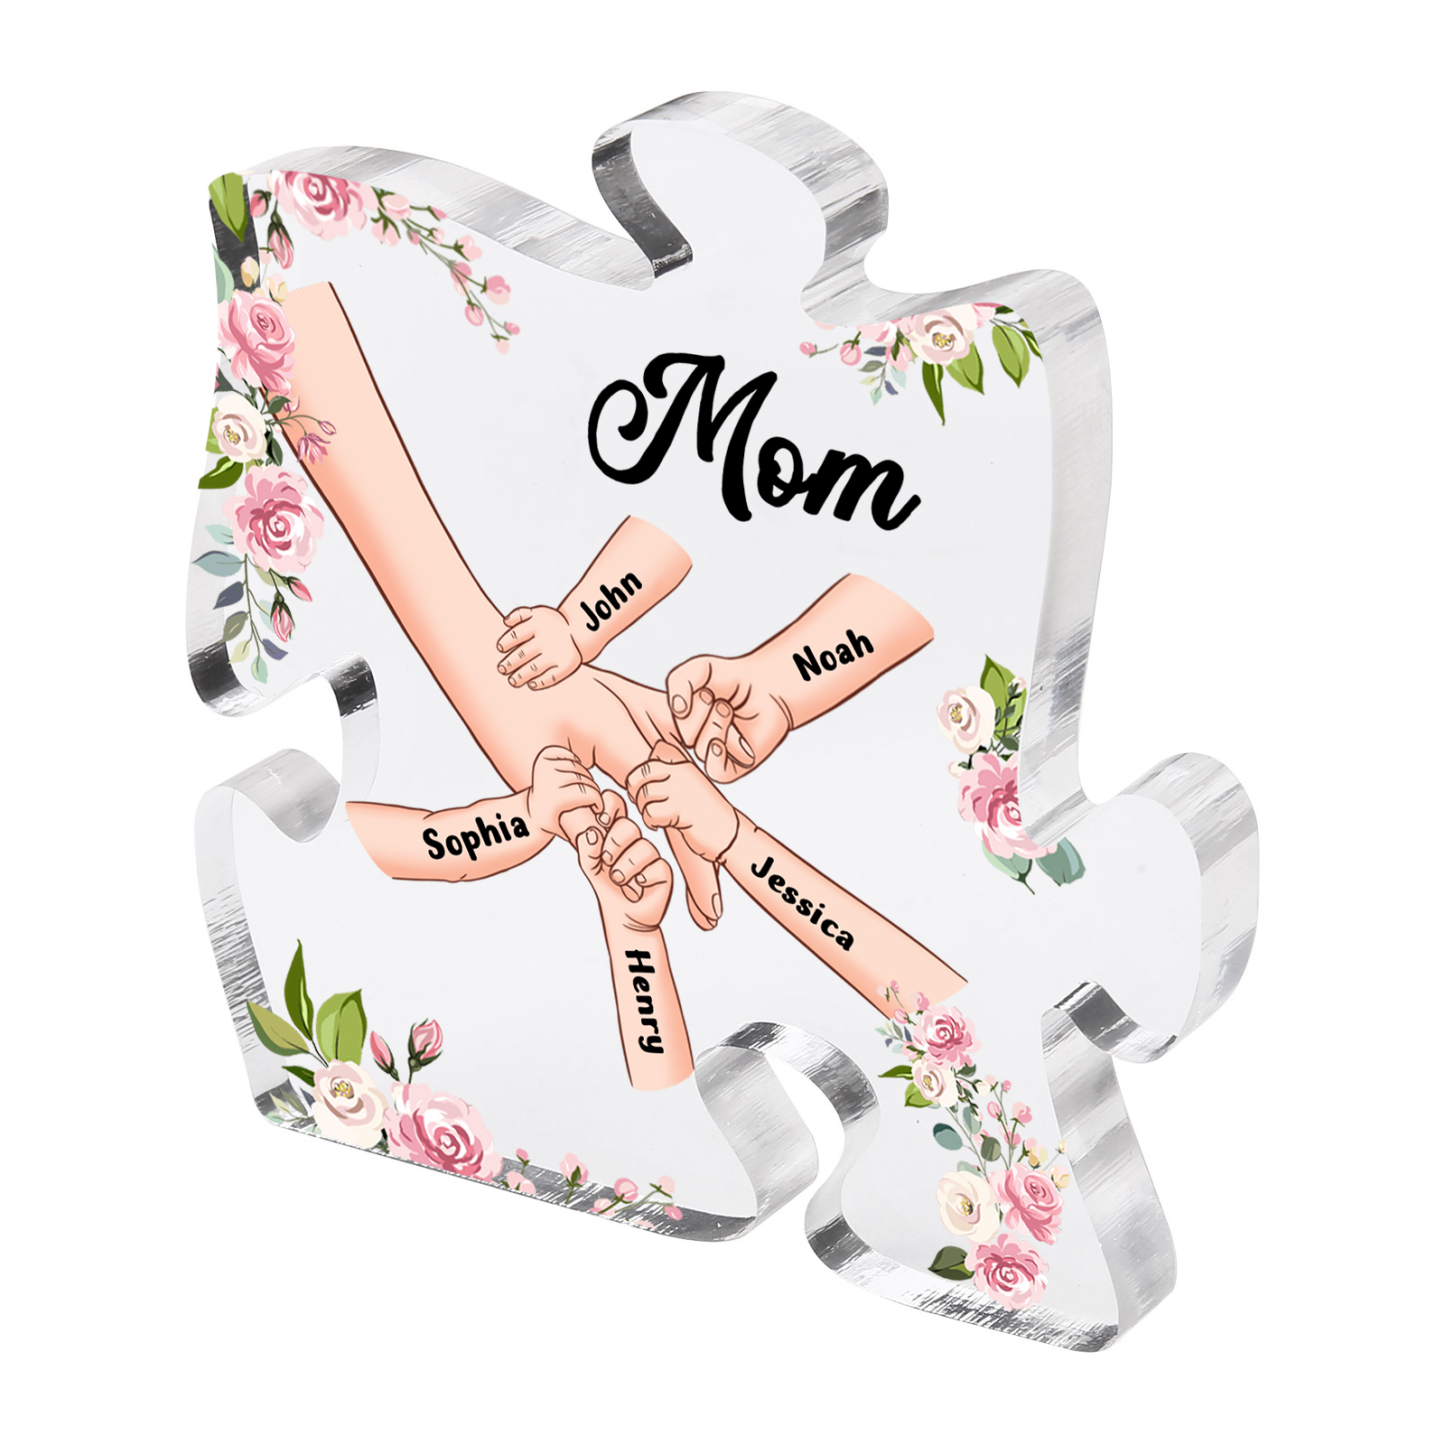 5 Name - Personalized Acrylic Heart Keepsake Customized Name Holding Hands Acrylic Plaque Ornament Mother's Day Gift for Mom